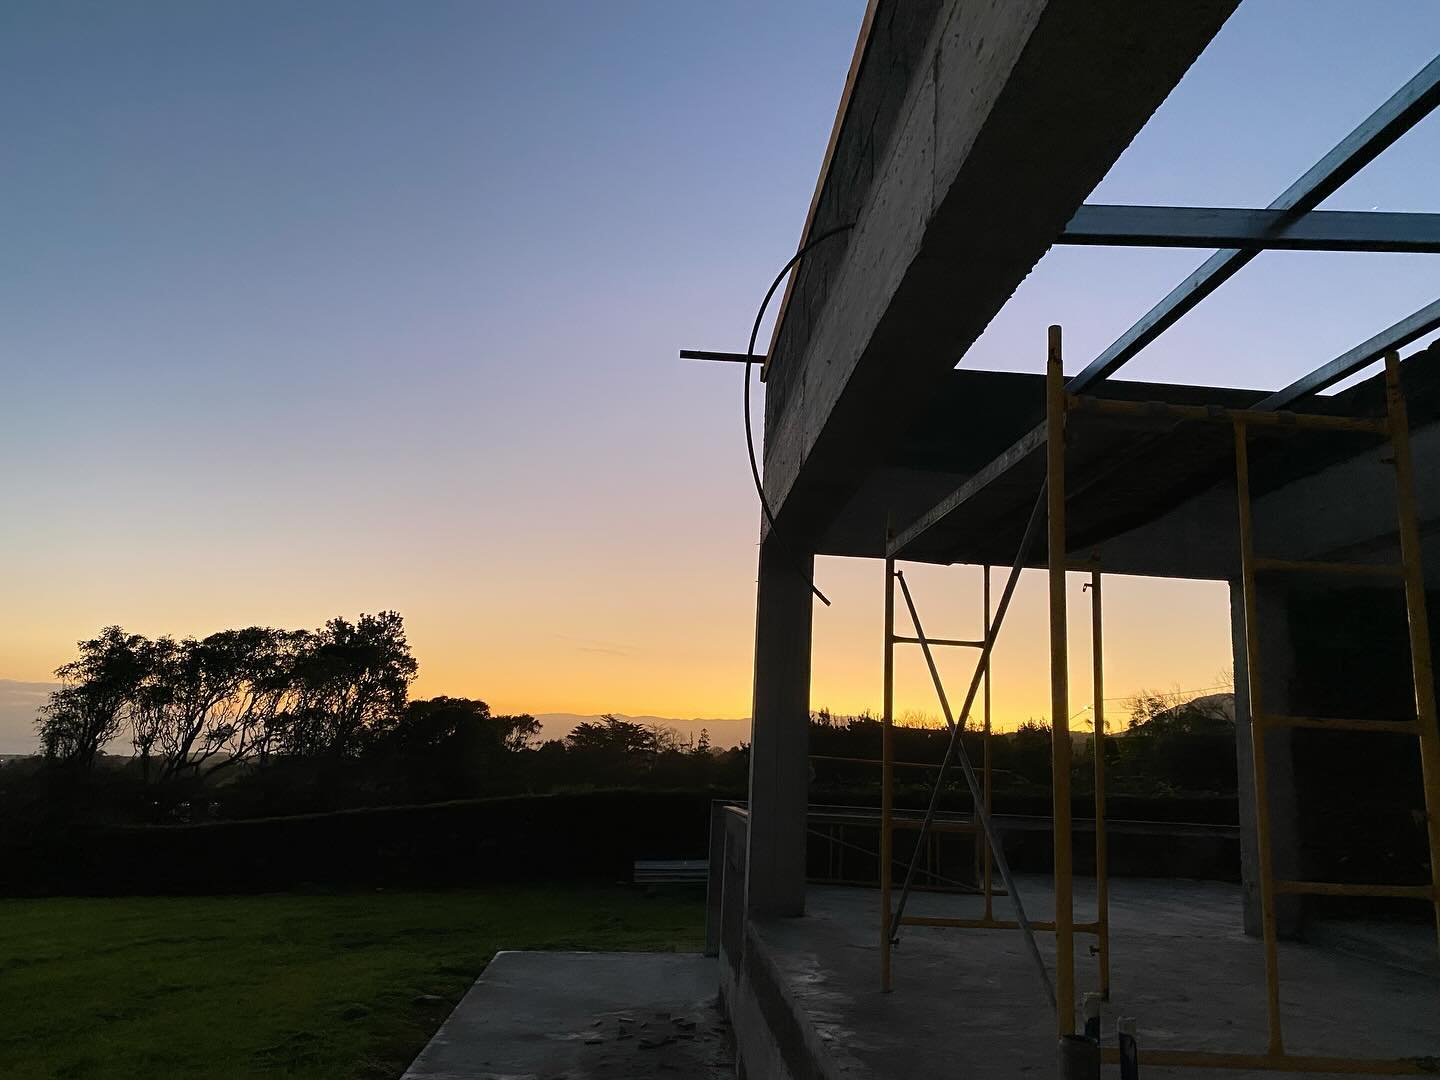 This morning, as the sun rises and the contractor is about to start on the roof for the kitchen expansion